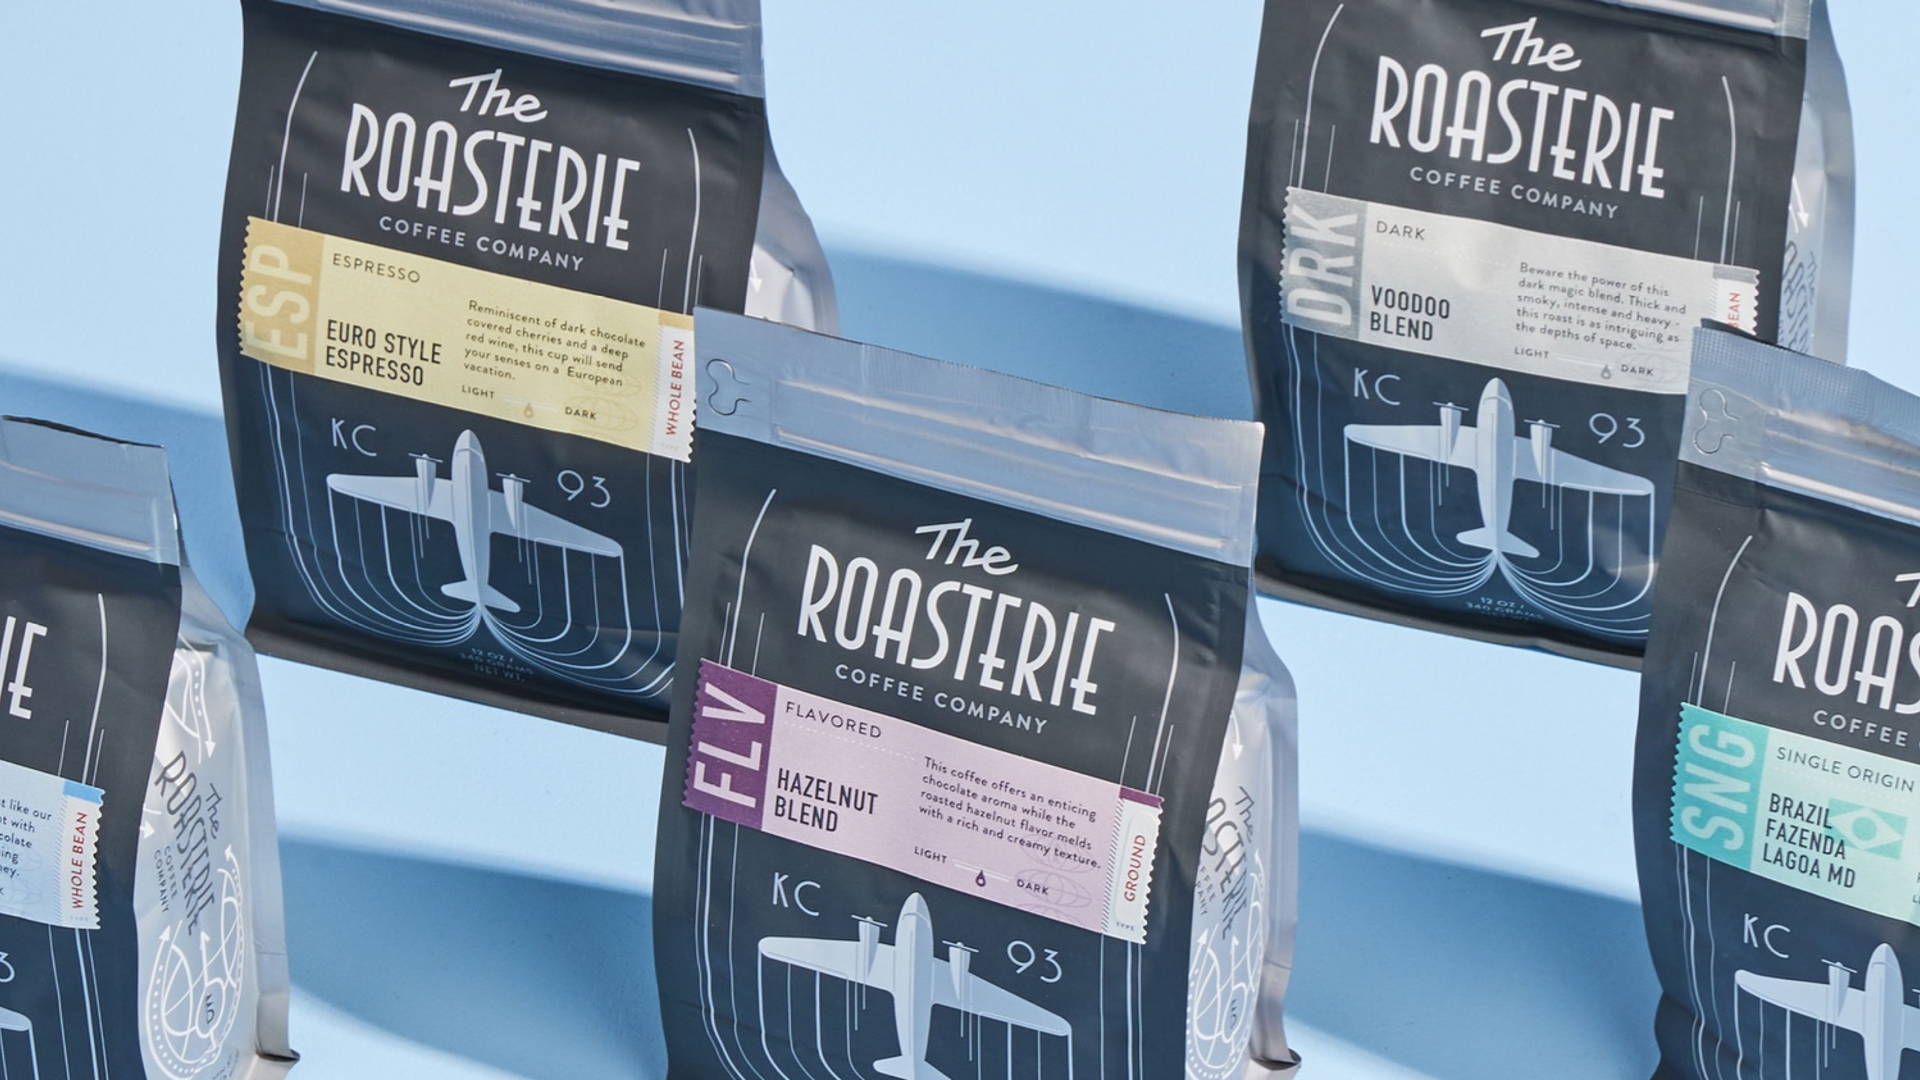 Featured image for The Roasterie Coffee Company Redesign Embraces Its Rich Heritage